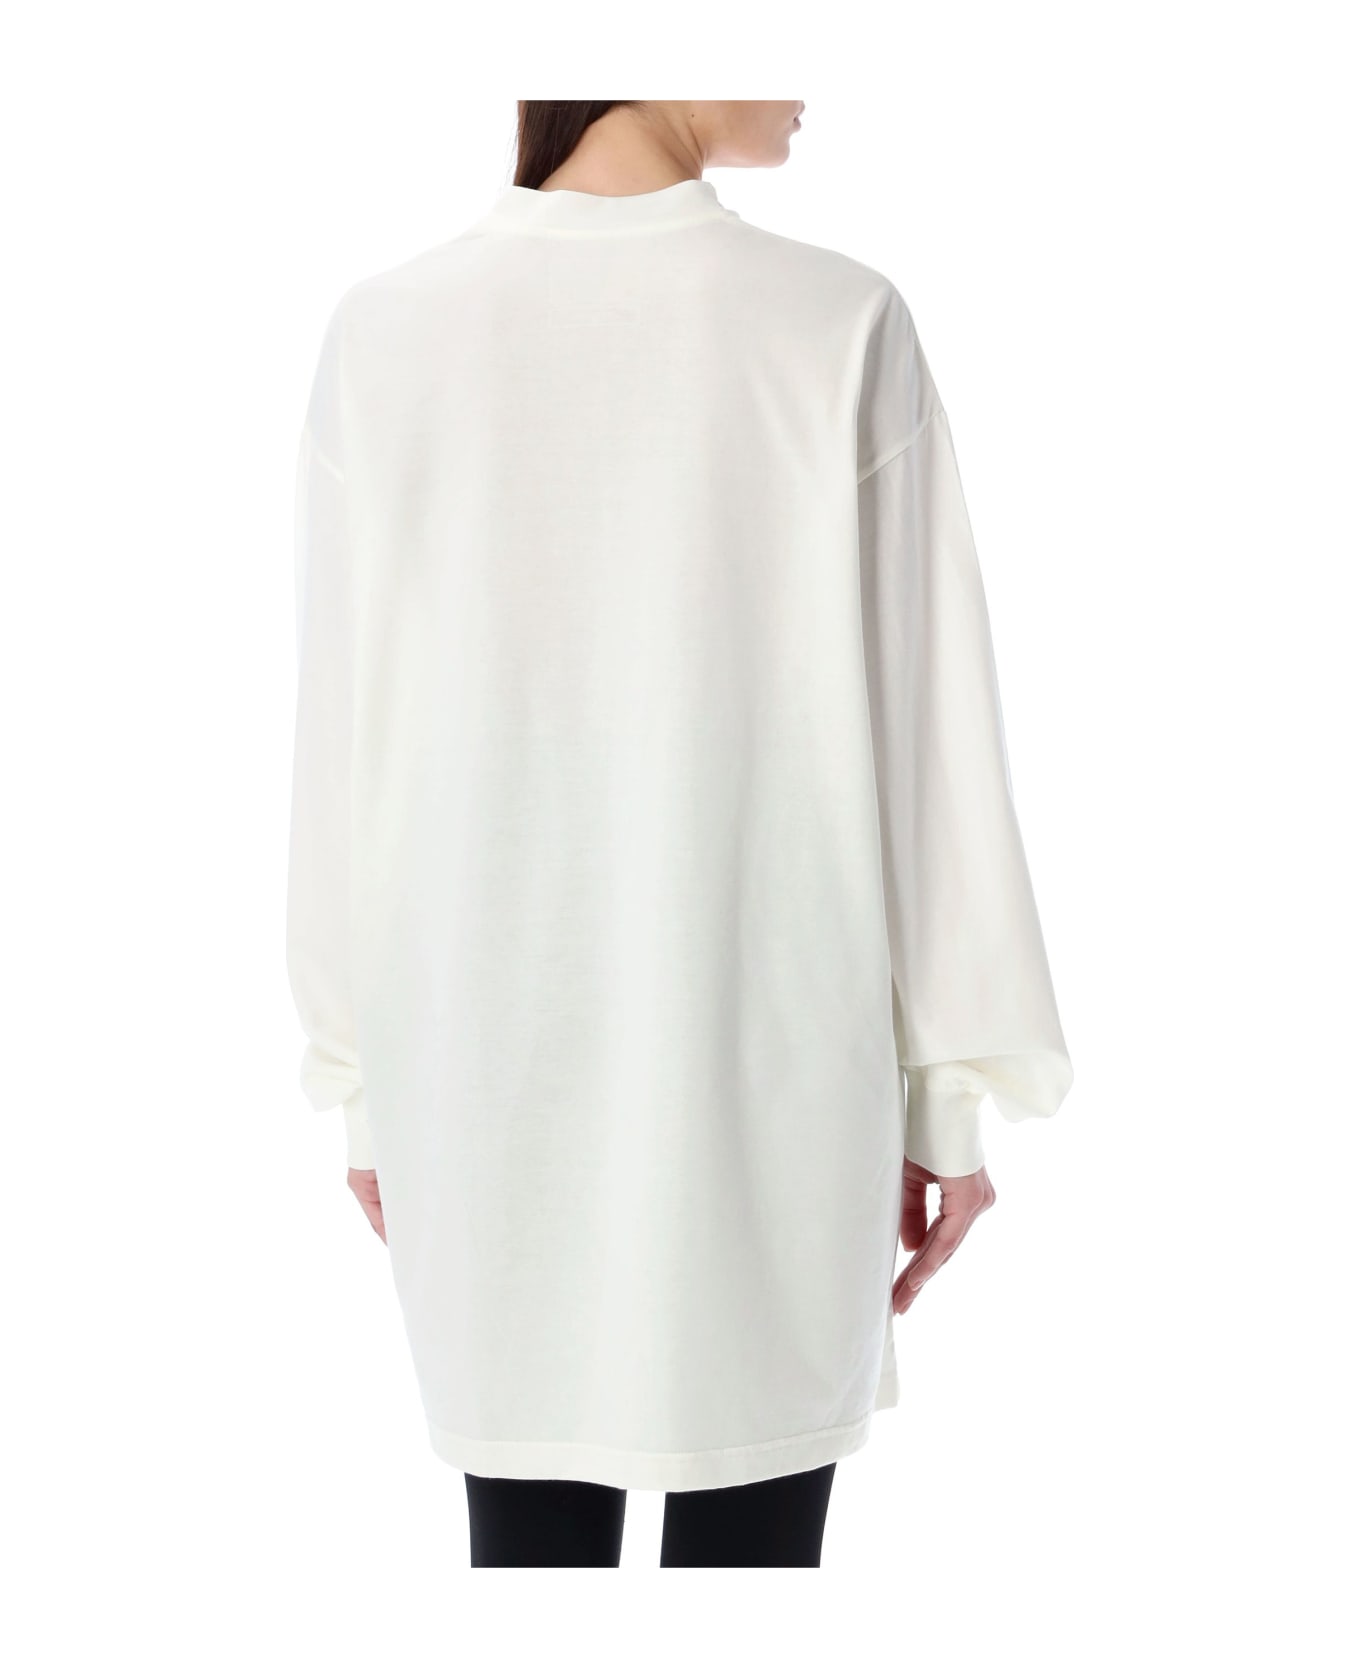 Y-3 Mock Neck Long Sleeves T-shirt - WHITE Tシャツ